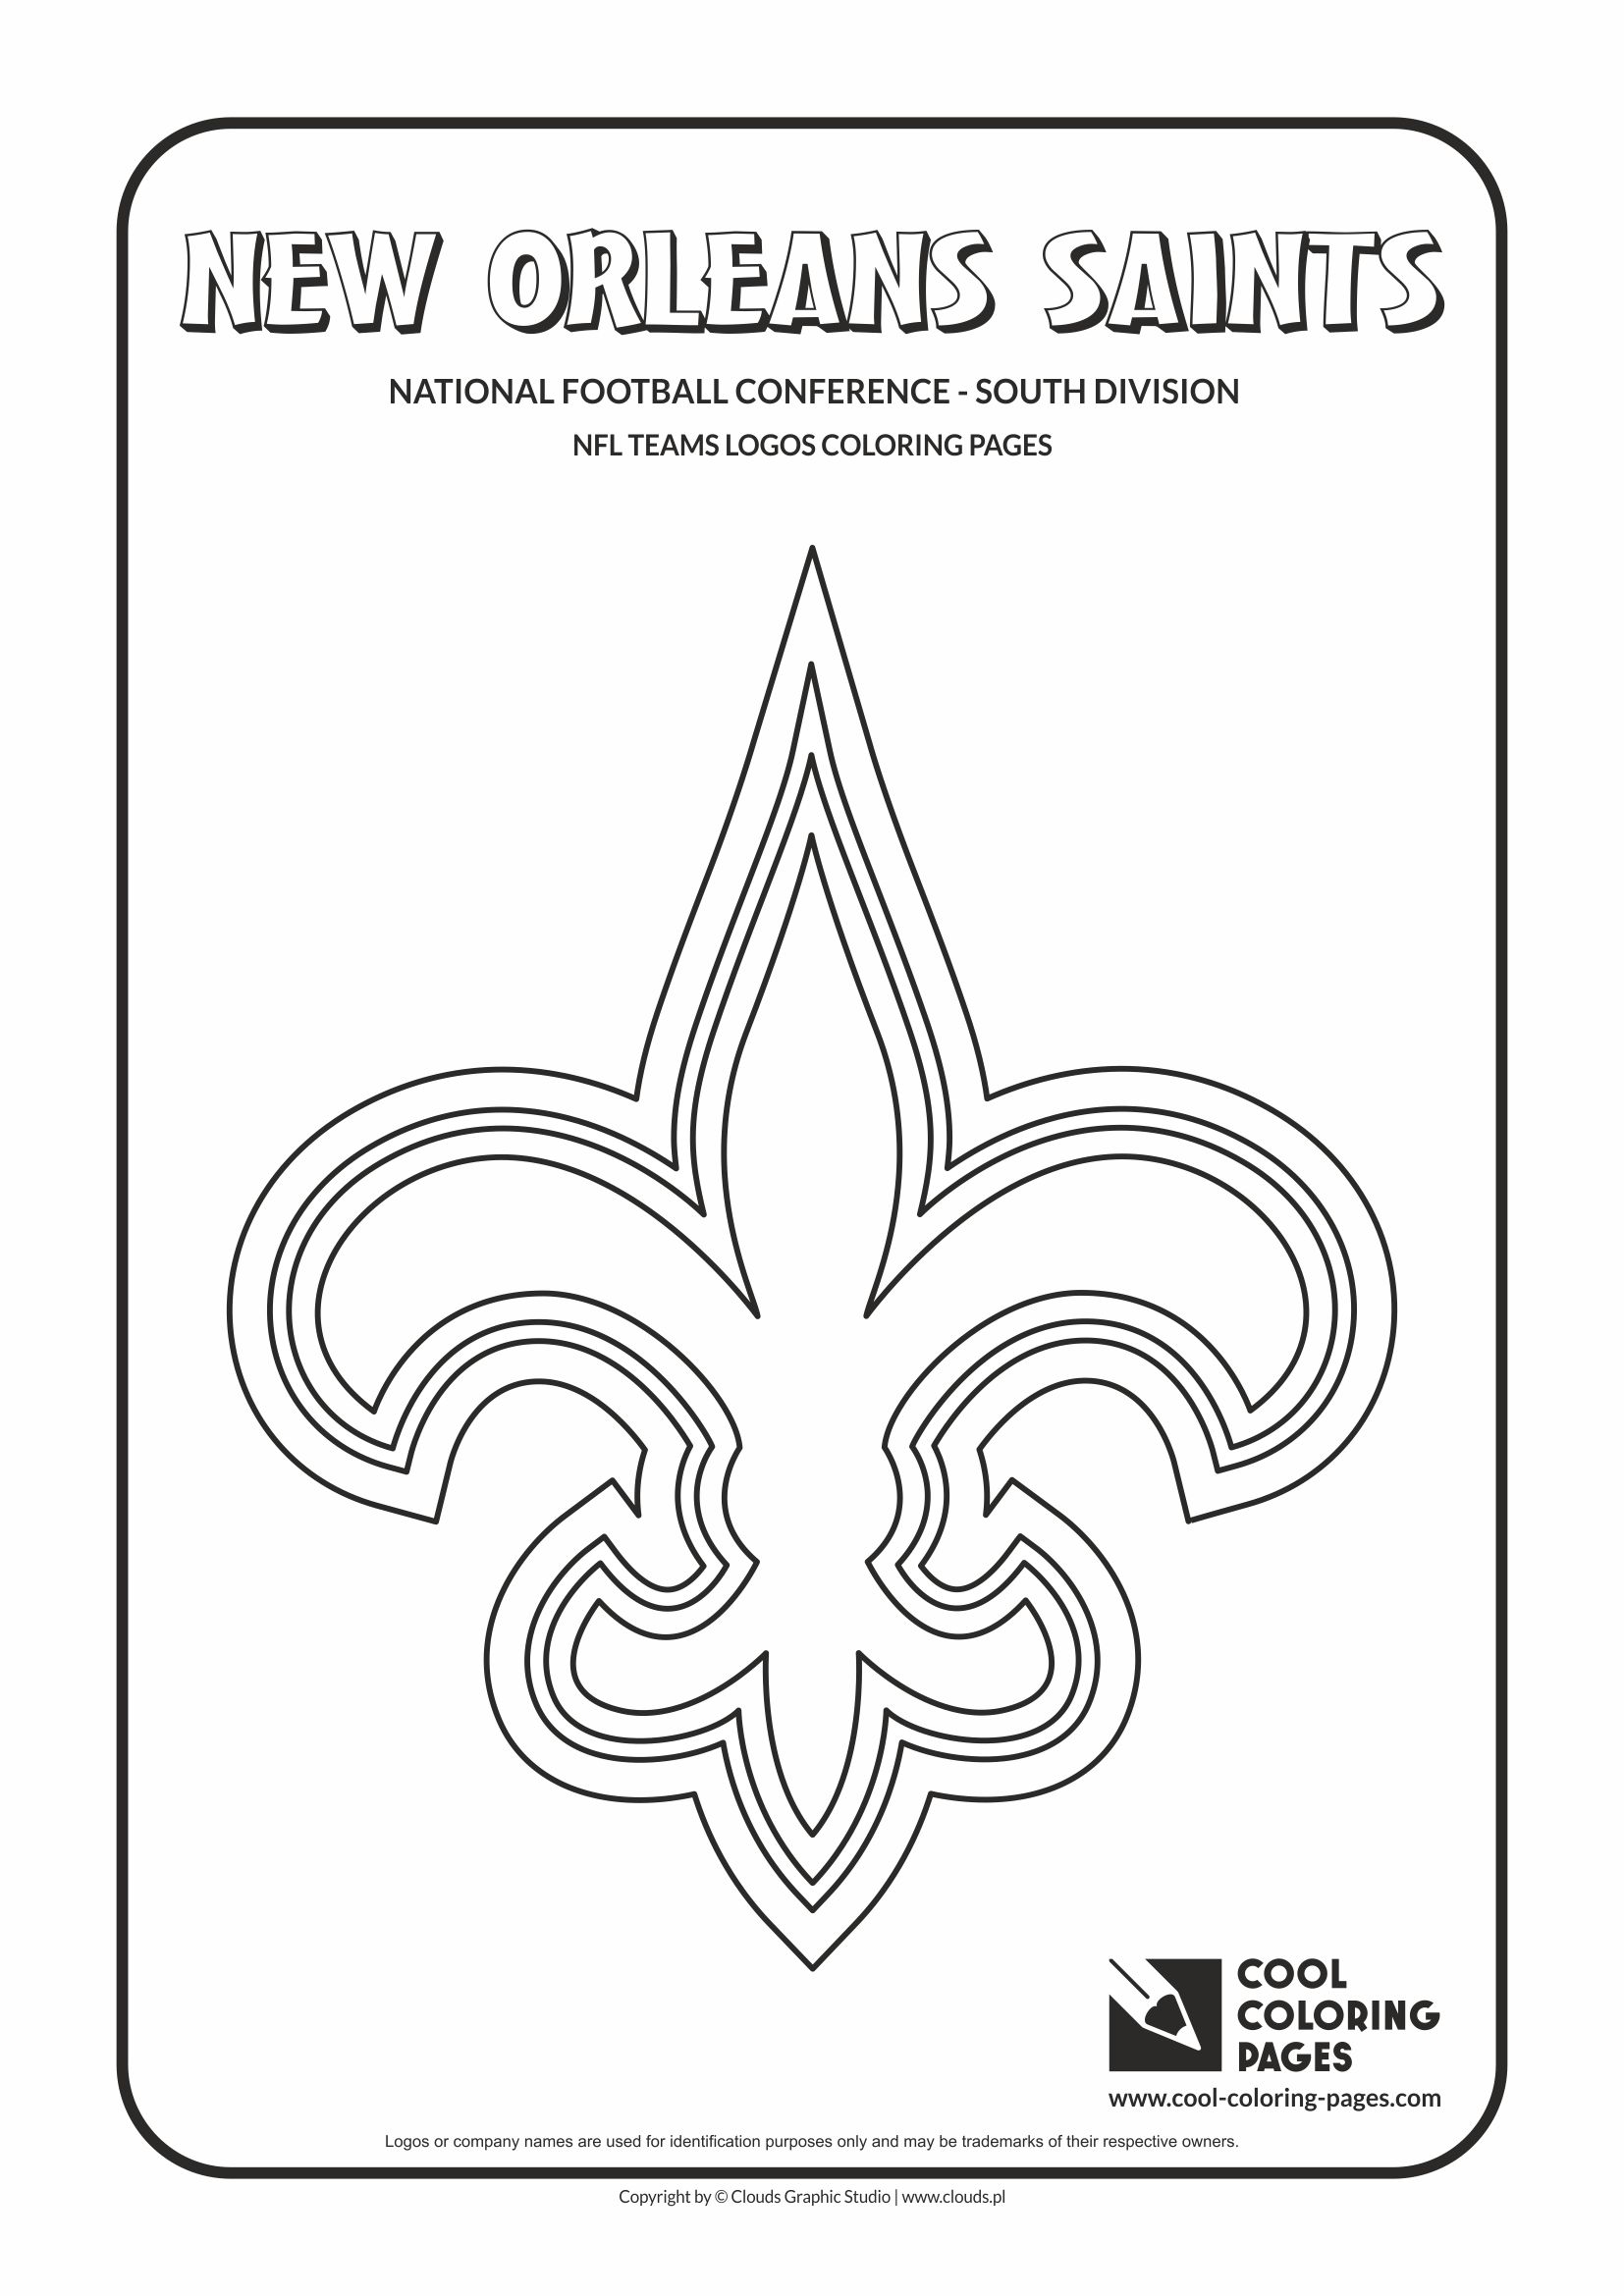 Cool Coloring Pages New Orleans Saints - NFL American football teams